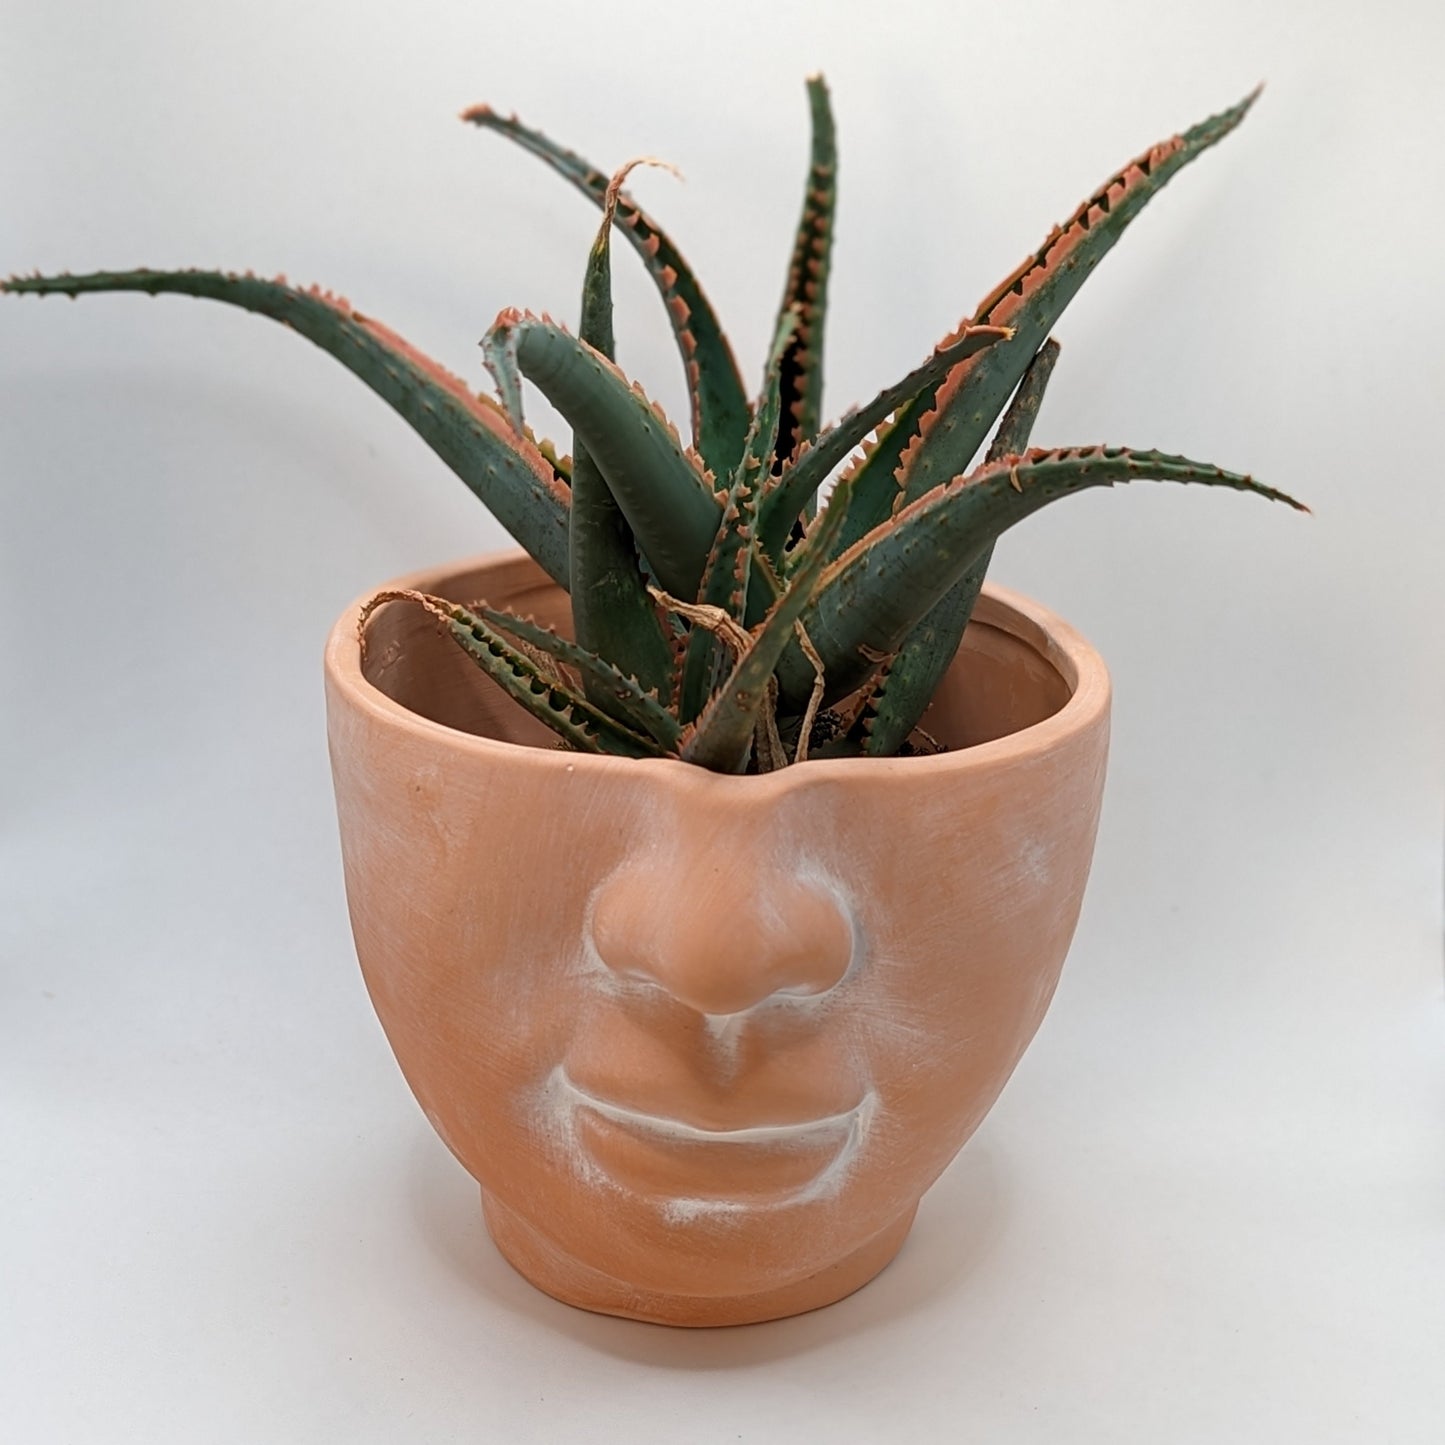 terracotta planter in the shape of a face with just the nose and mouth showing